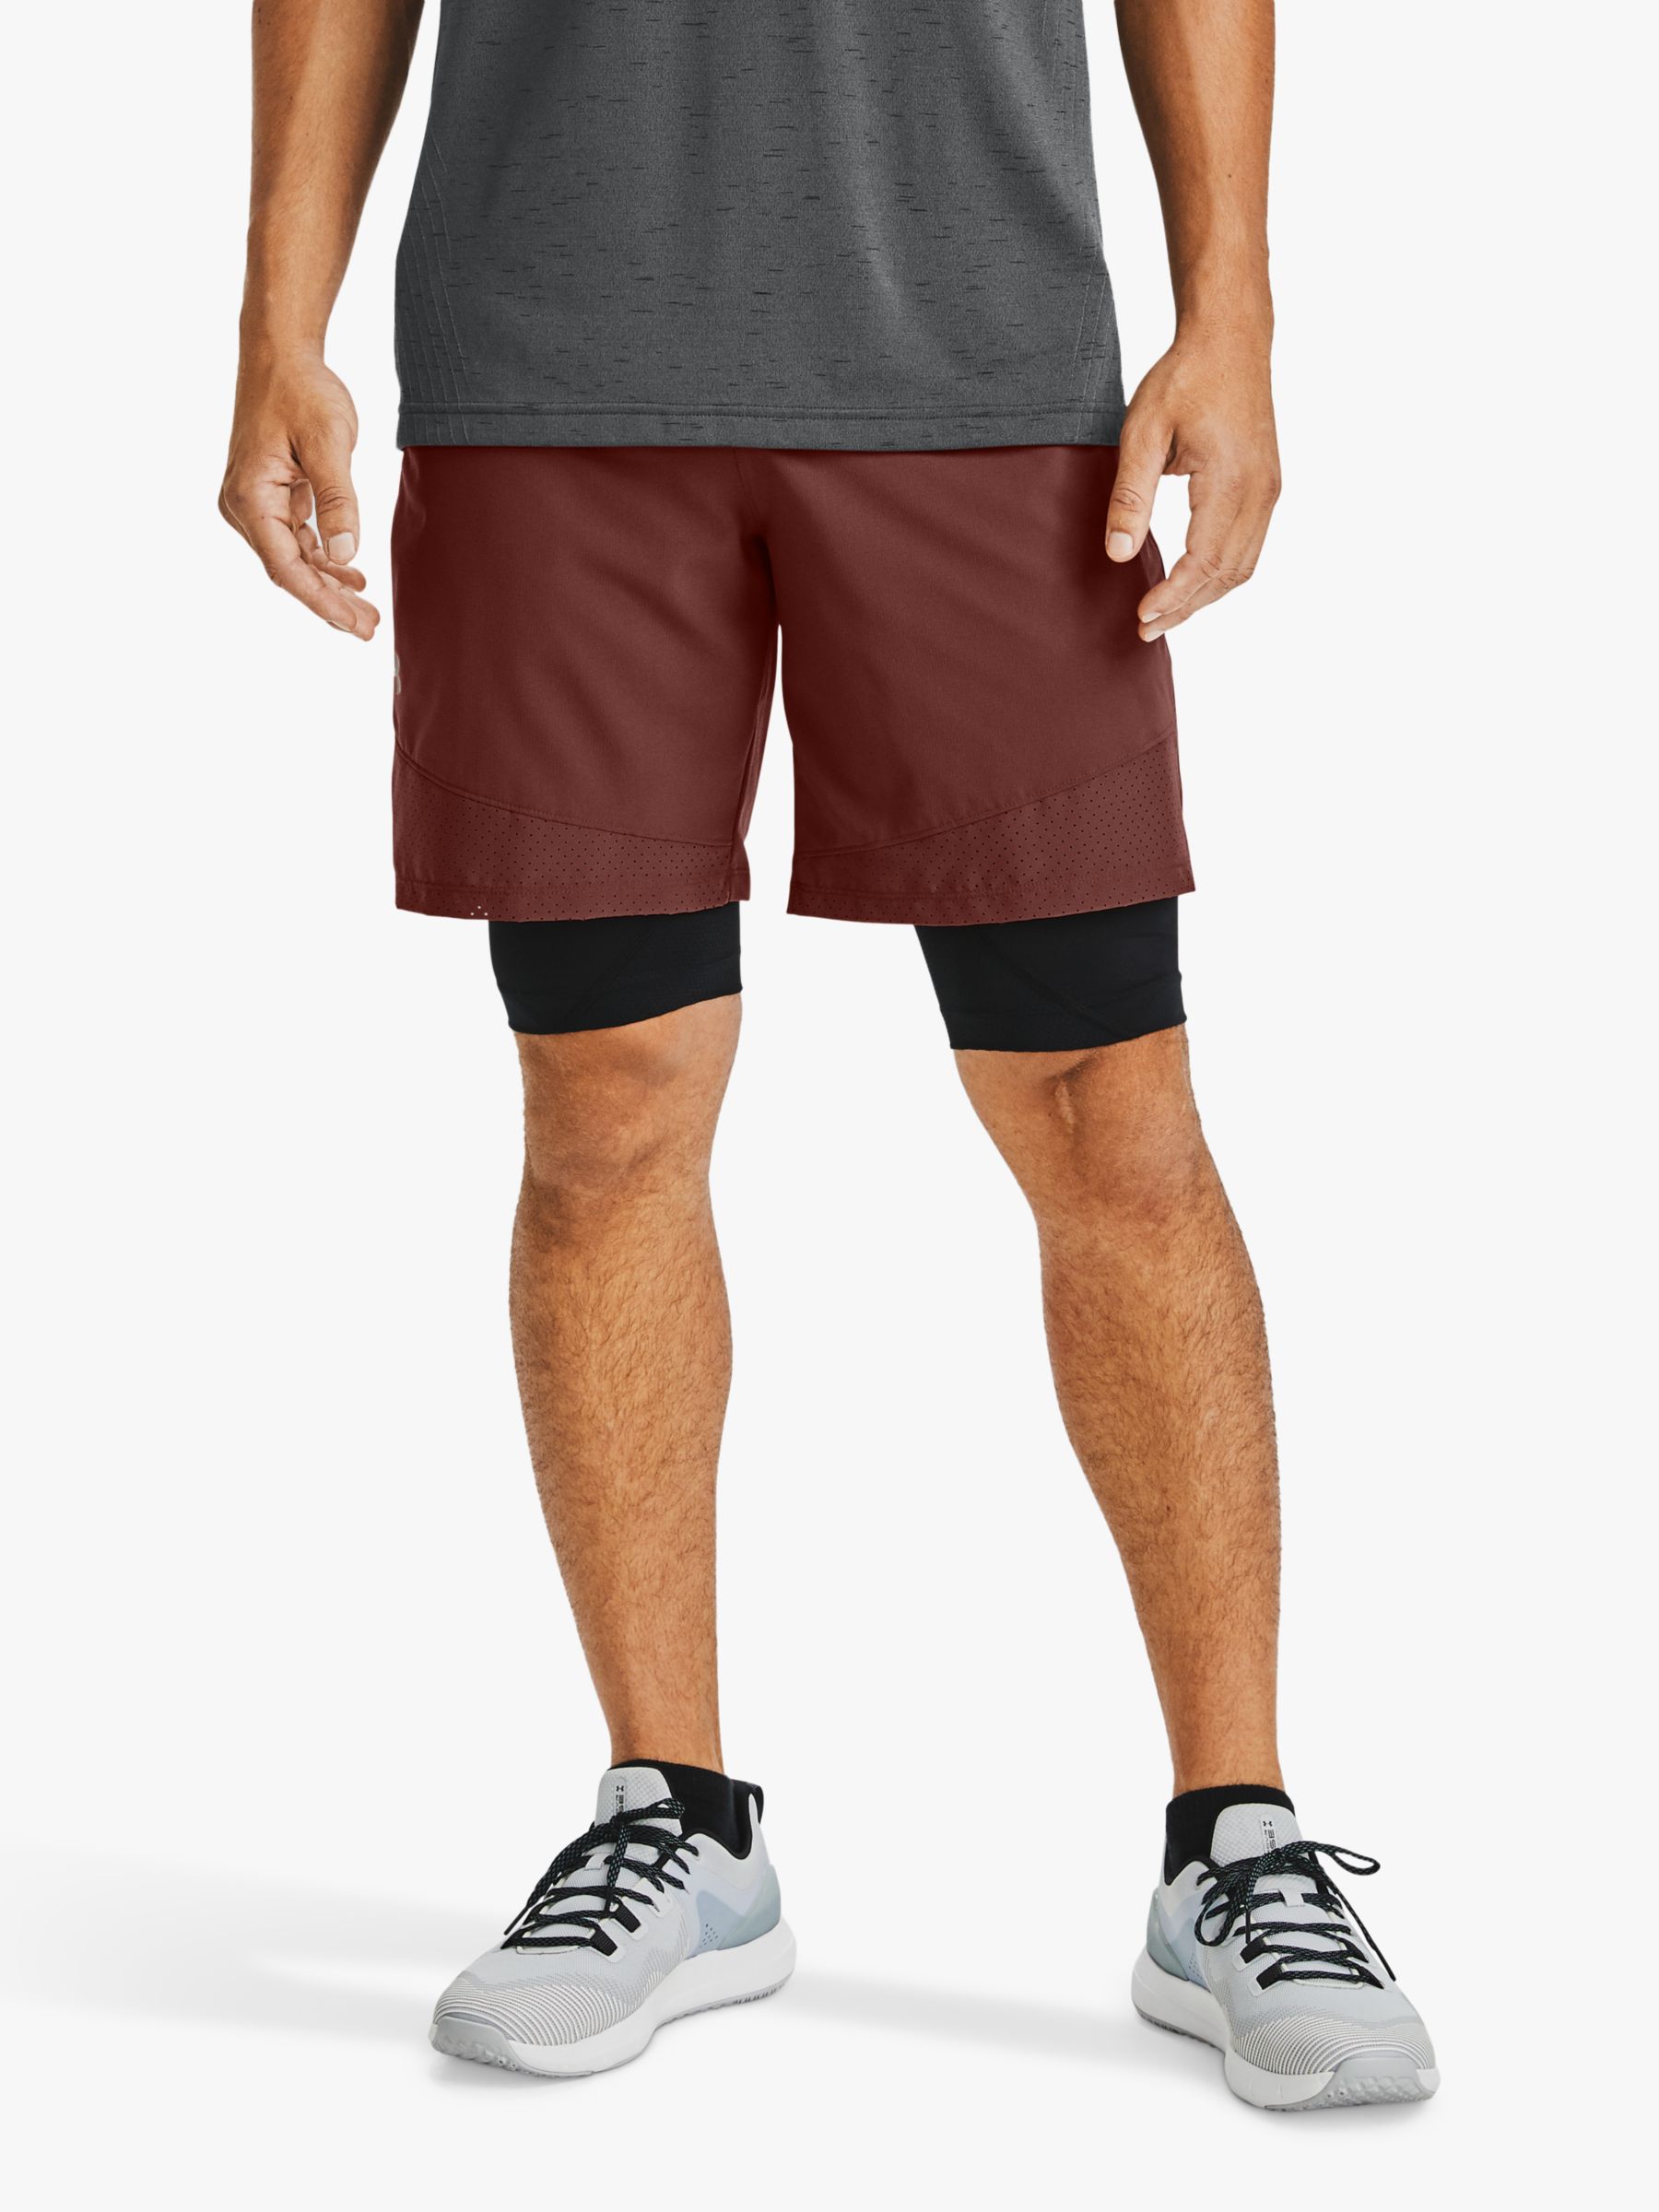 Download Under Armour Vanish Woven Training Shorts, Cinna Red at ...